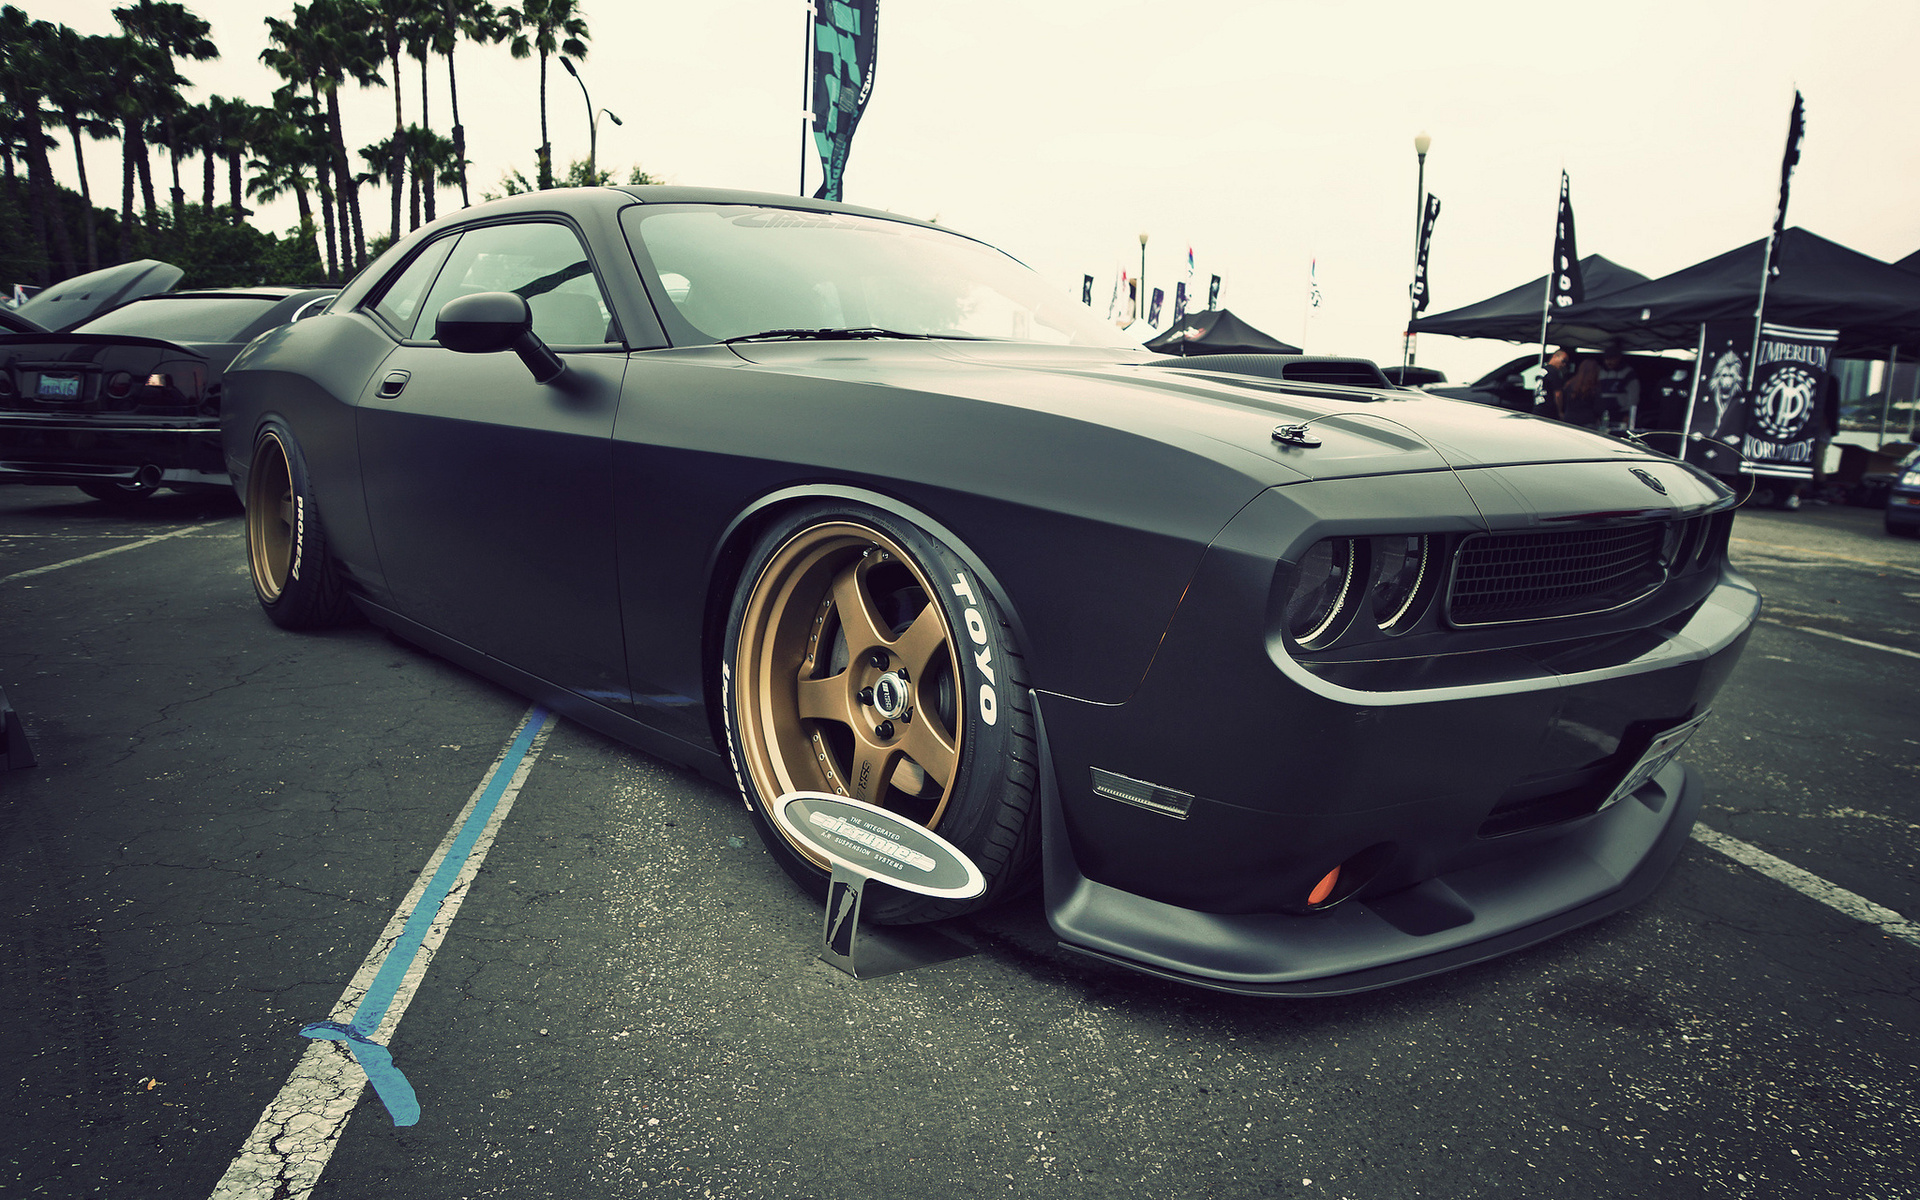 dodge, Challenger, Vehicles, Cars, Custom, Exotic, Muscle, Tuning, Race, Racing, Roads, Track Wallpaper